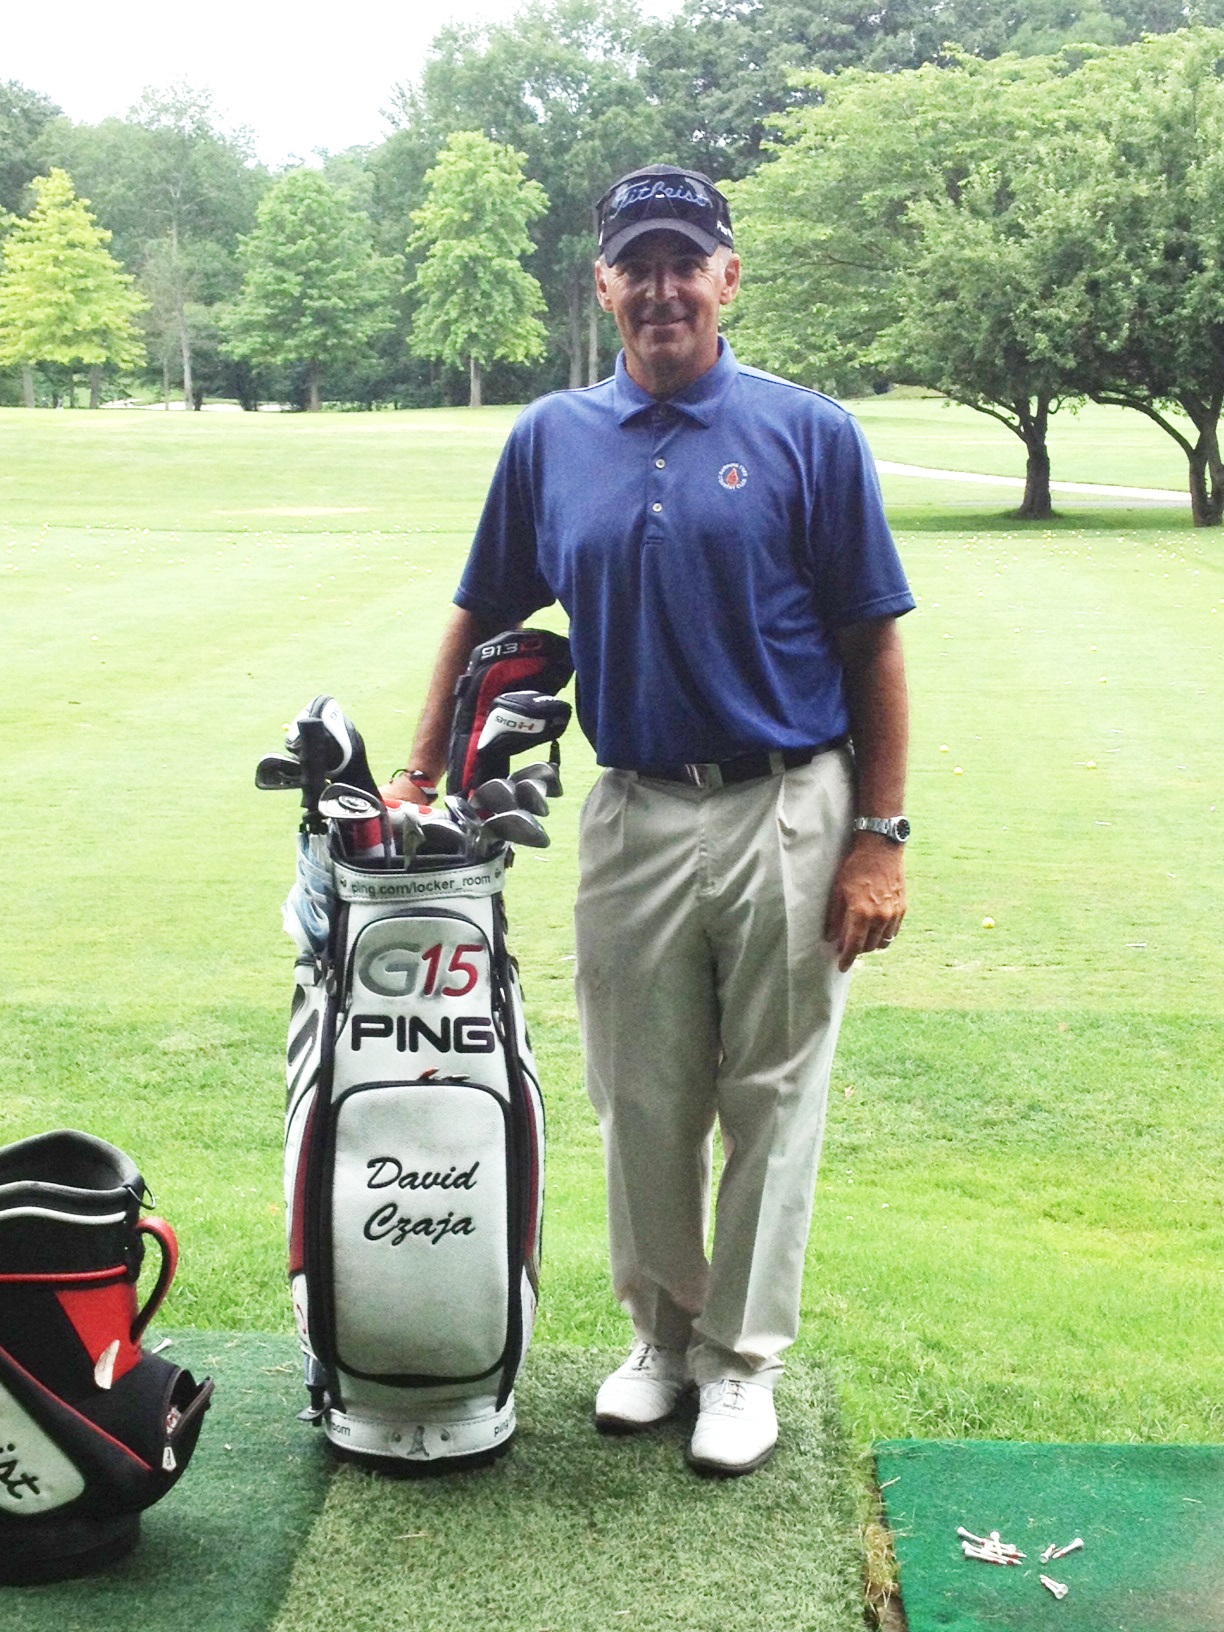 David, a professional golfer, donated stem cells to save a life. 